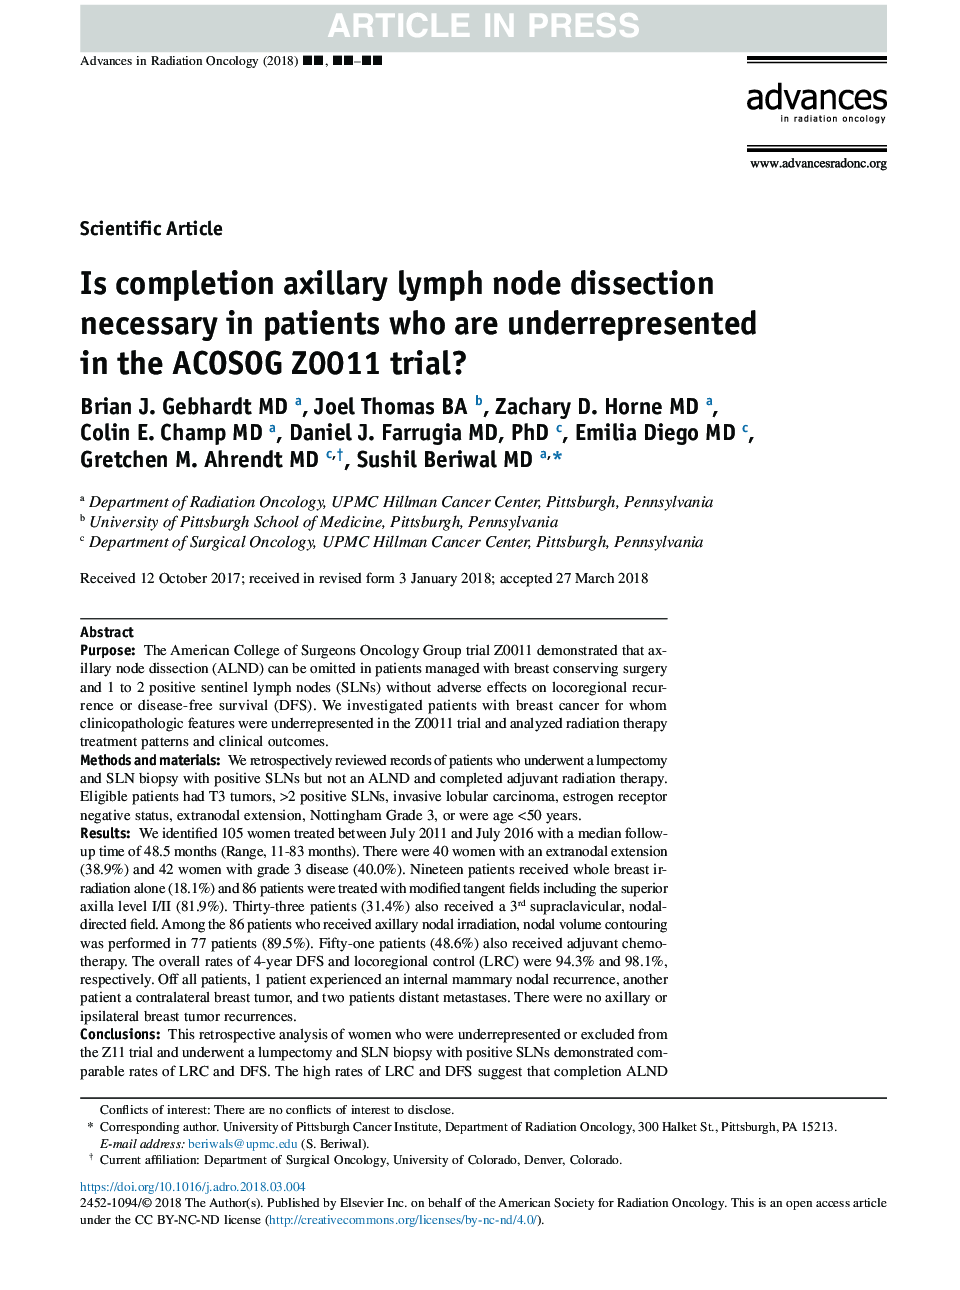 Is completion axillary lymph node dissection necessary in patients who are underrepresented in the ACOSOG Z0011 trial?